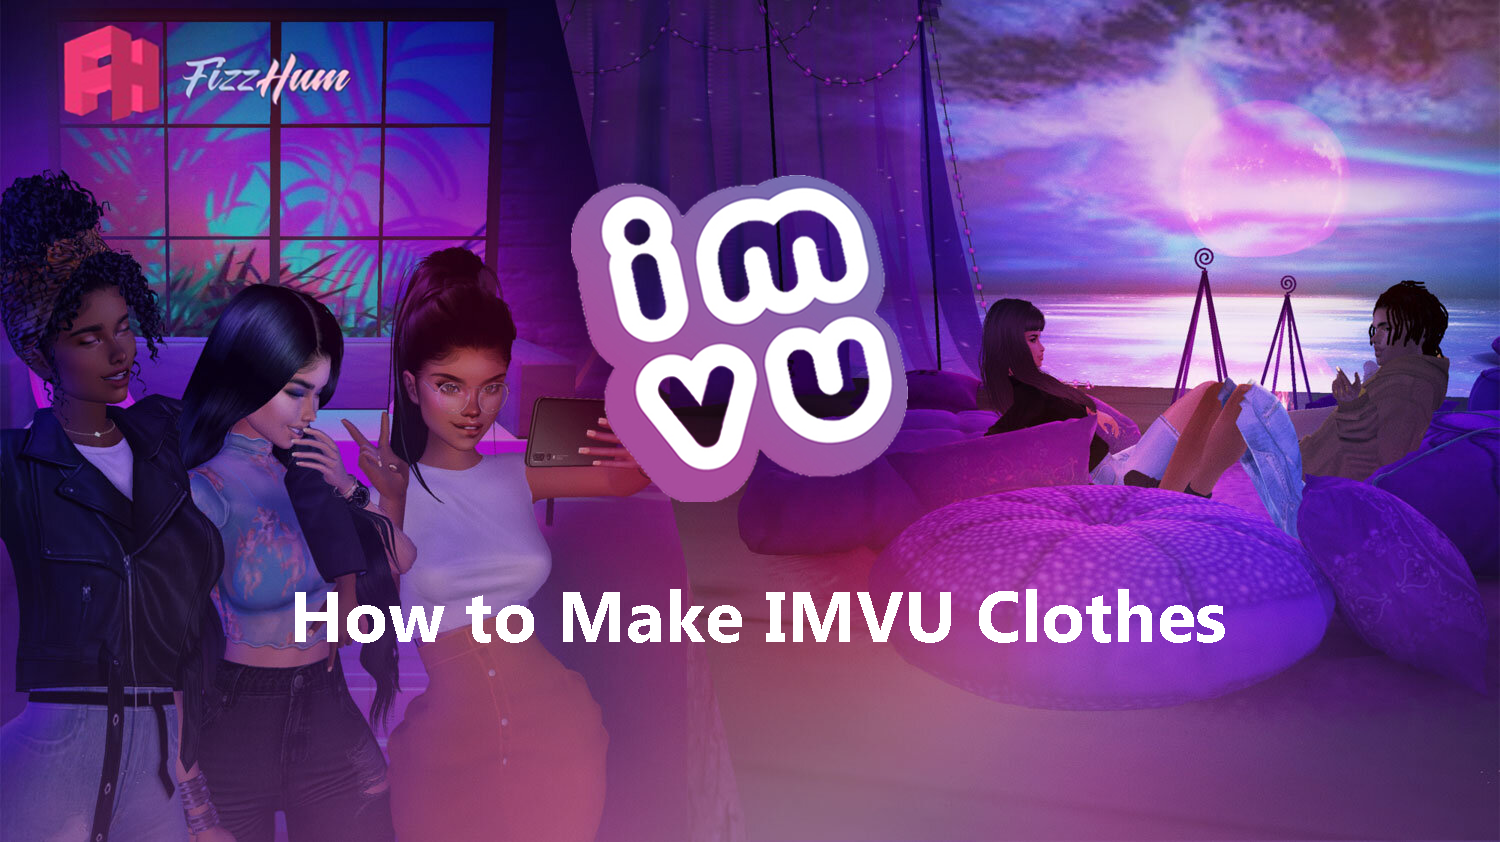  How to make clothes on IMVU - Step by Step Guide 2021